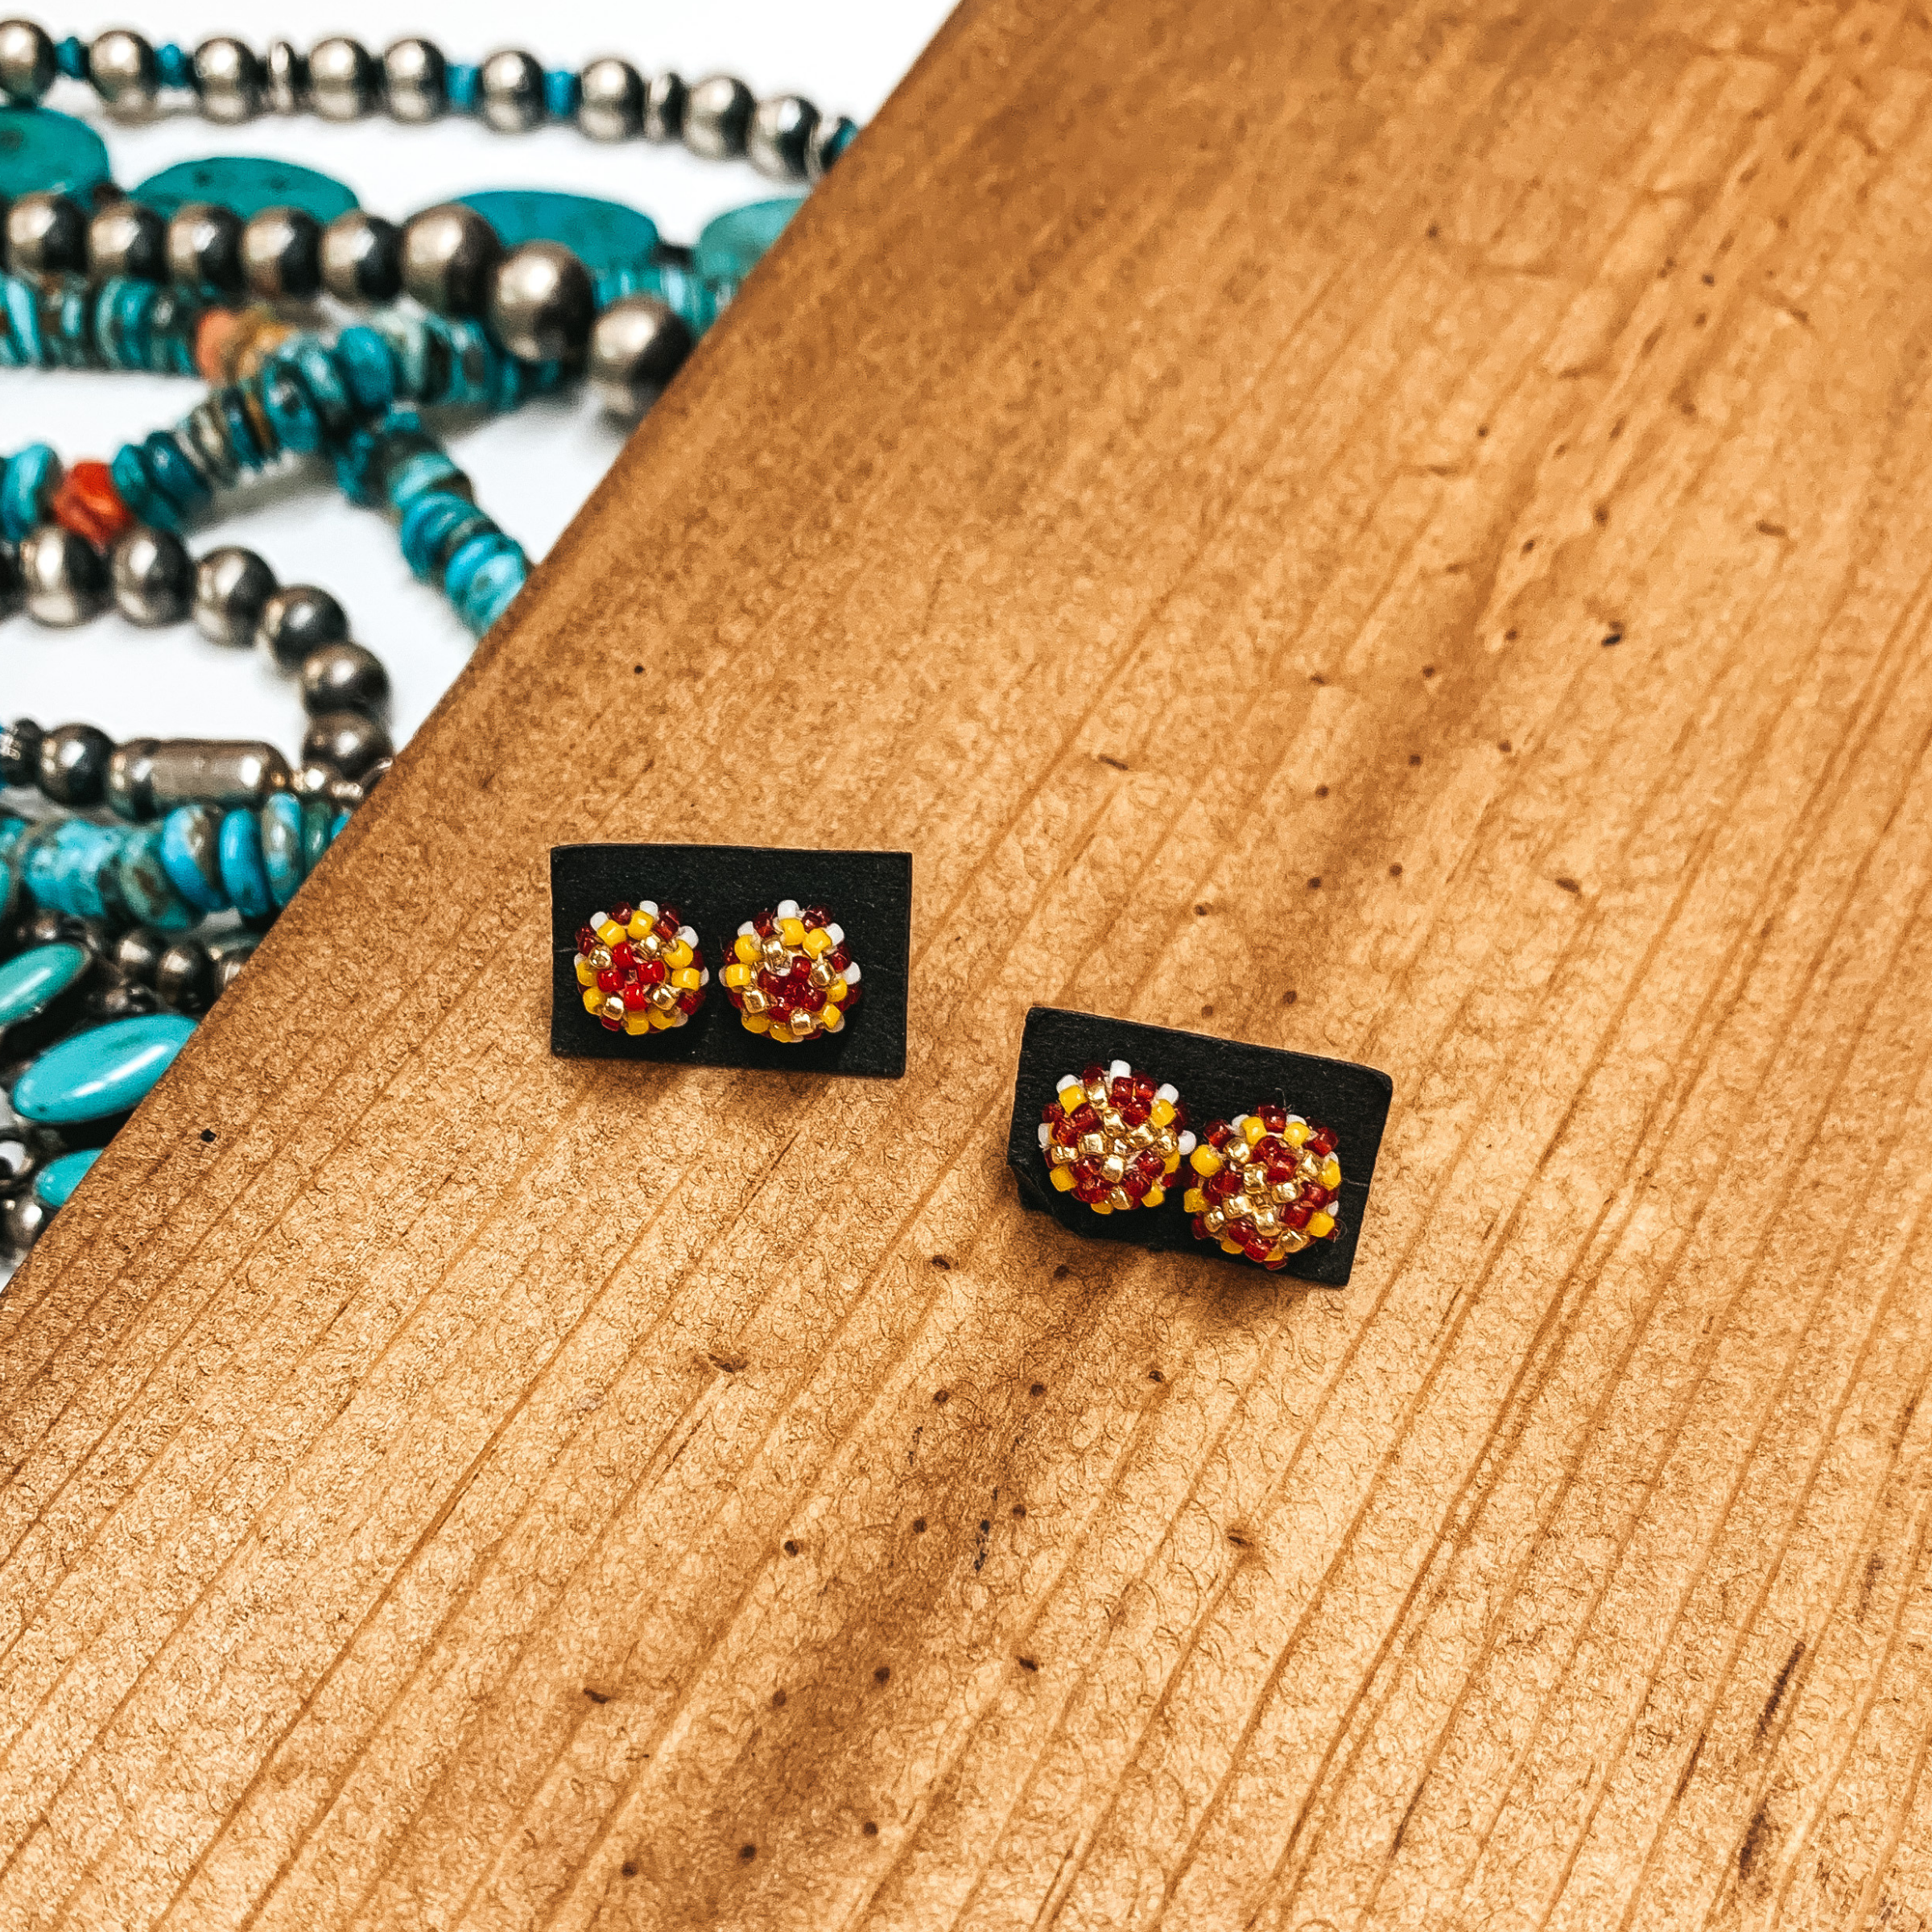 Navajo | Navajo Handmade Beaded Stud Earrings in Red, Yellow, and White - Giddy Up Glamour Boutique